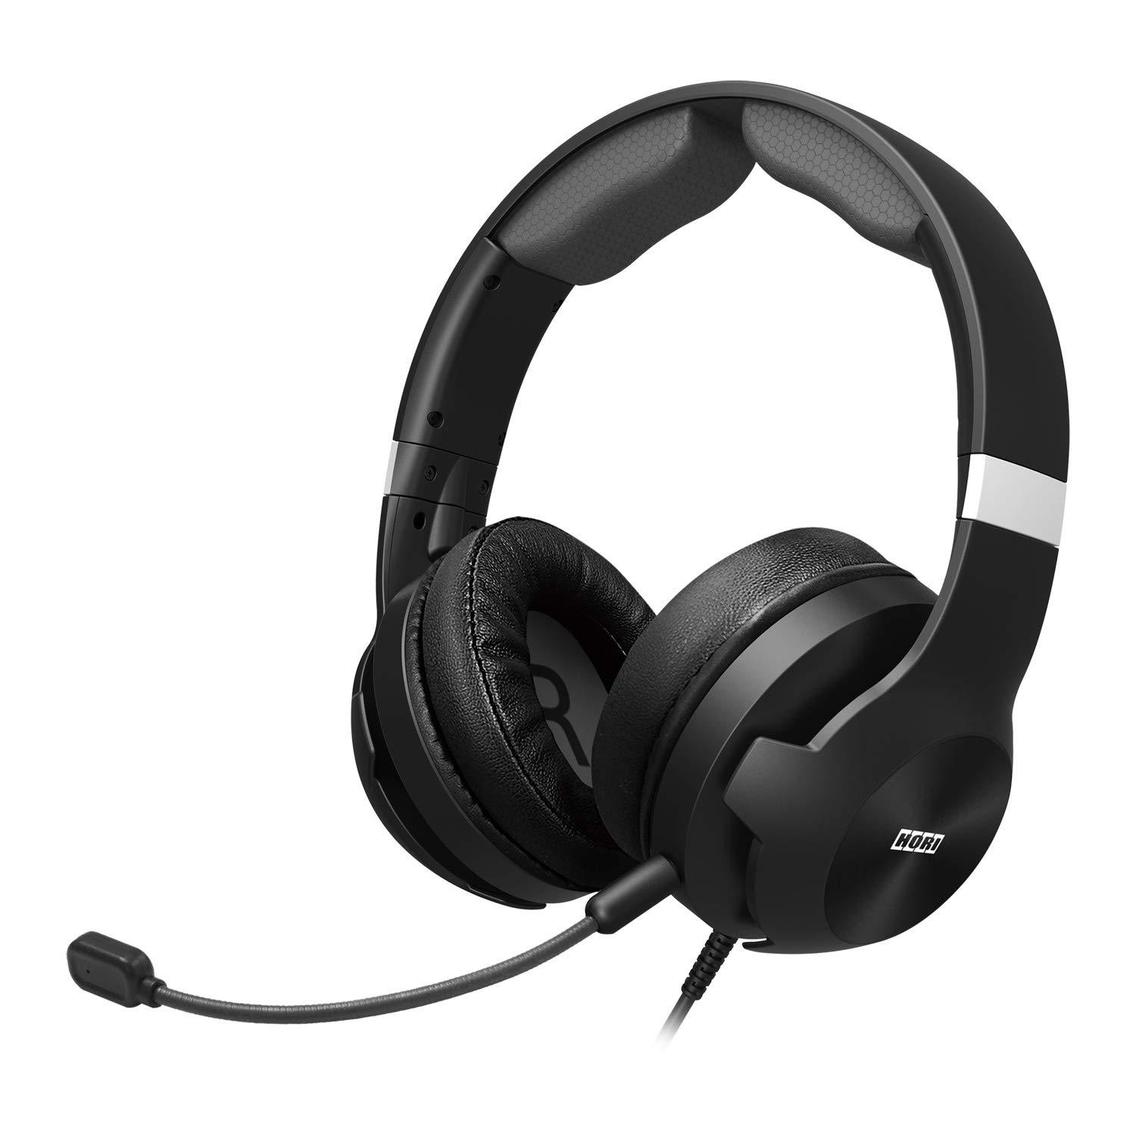 Hori Hg Wired Gaming Headset Pro For Xbox X/S